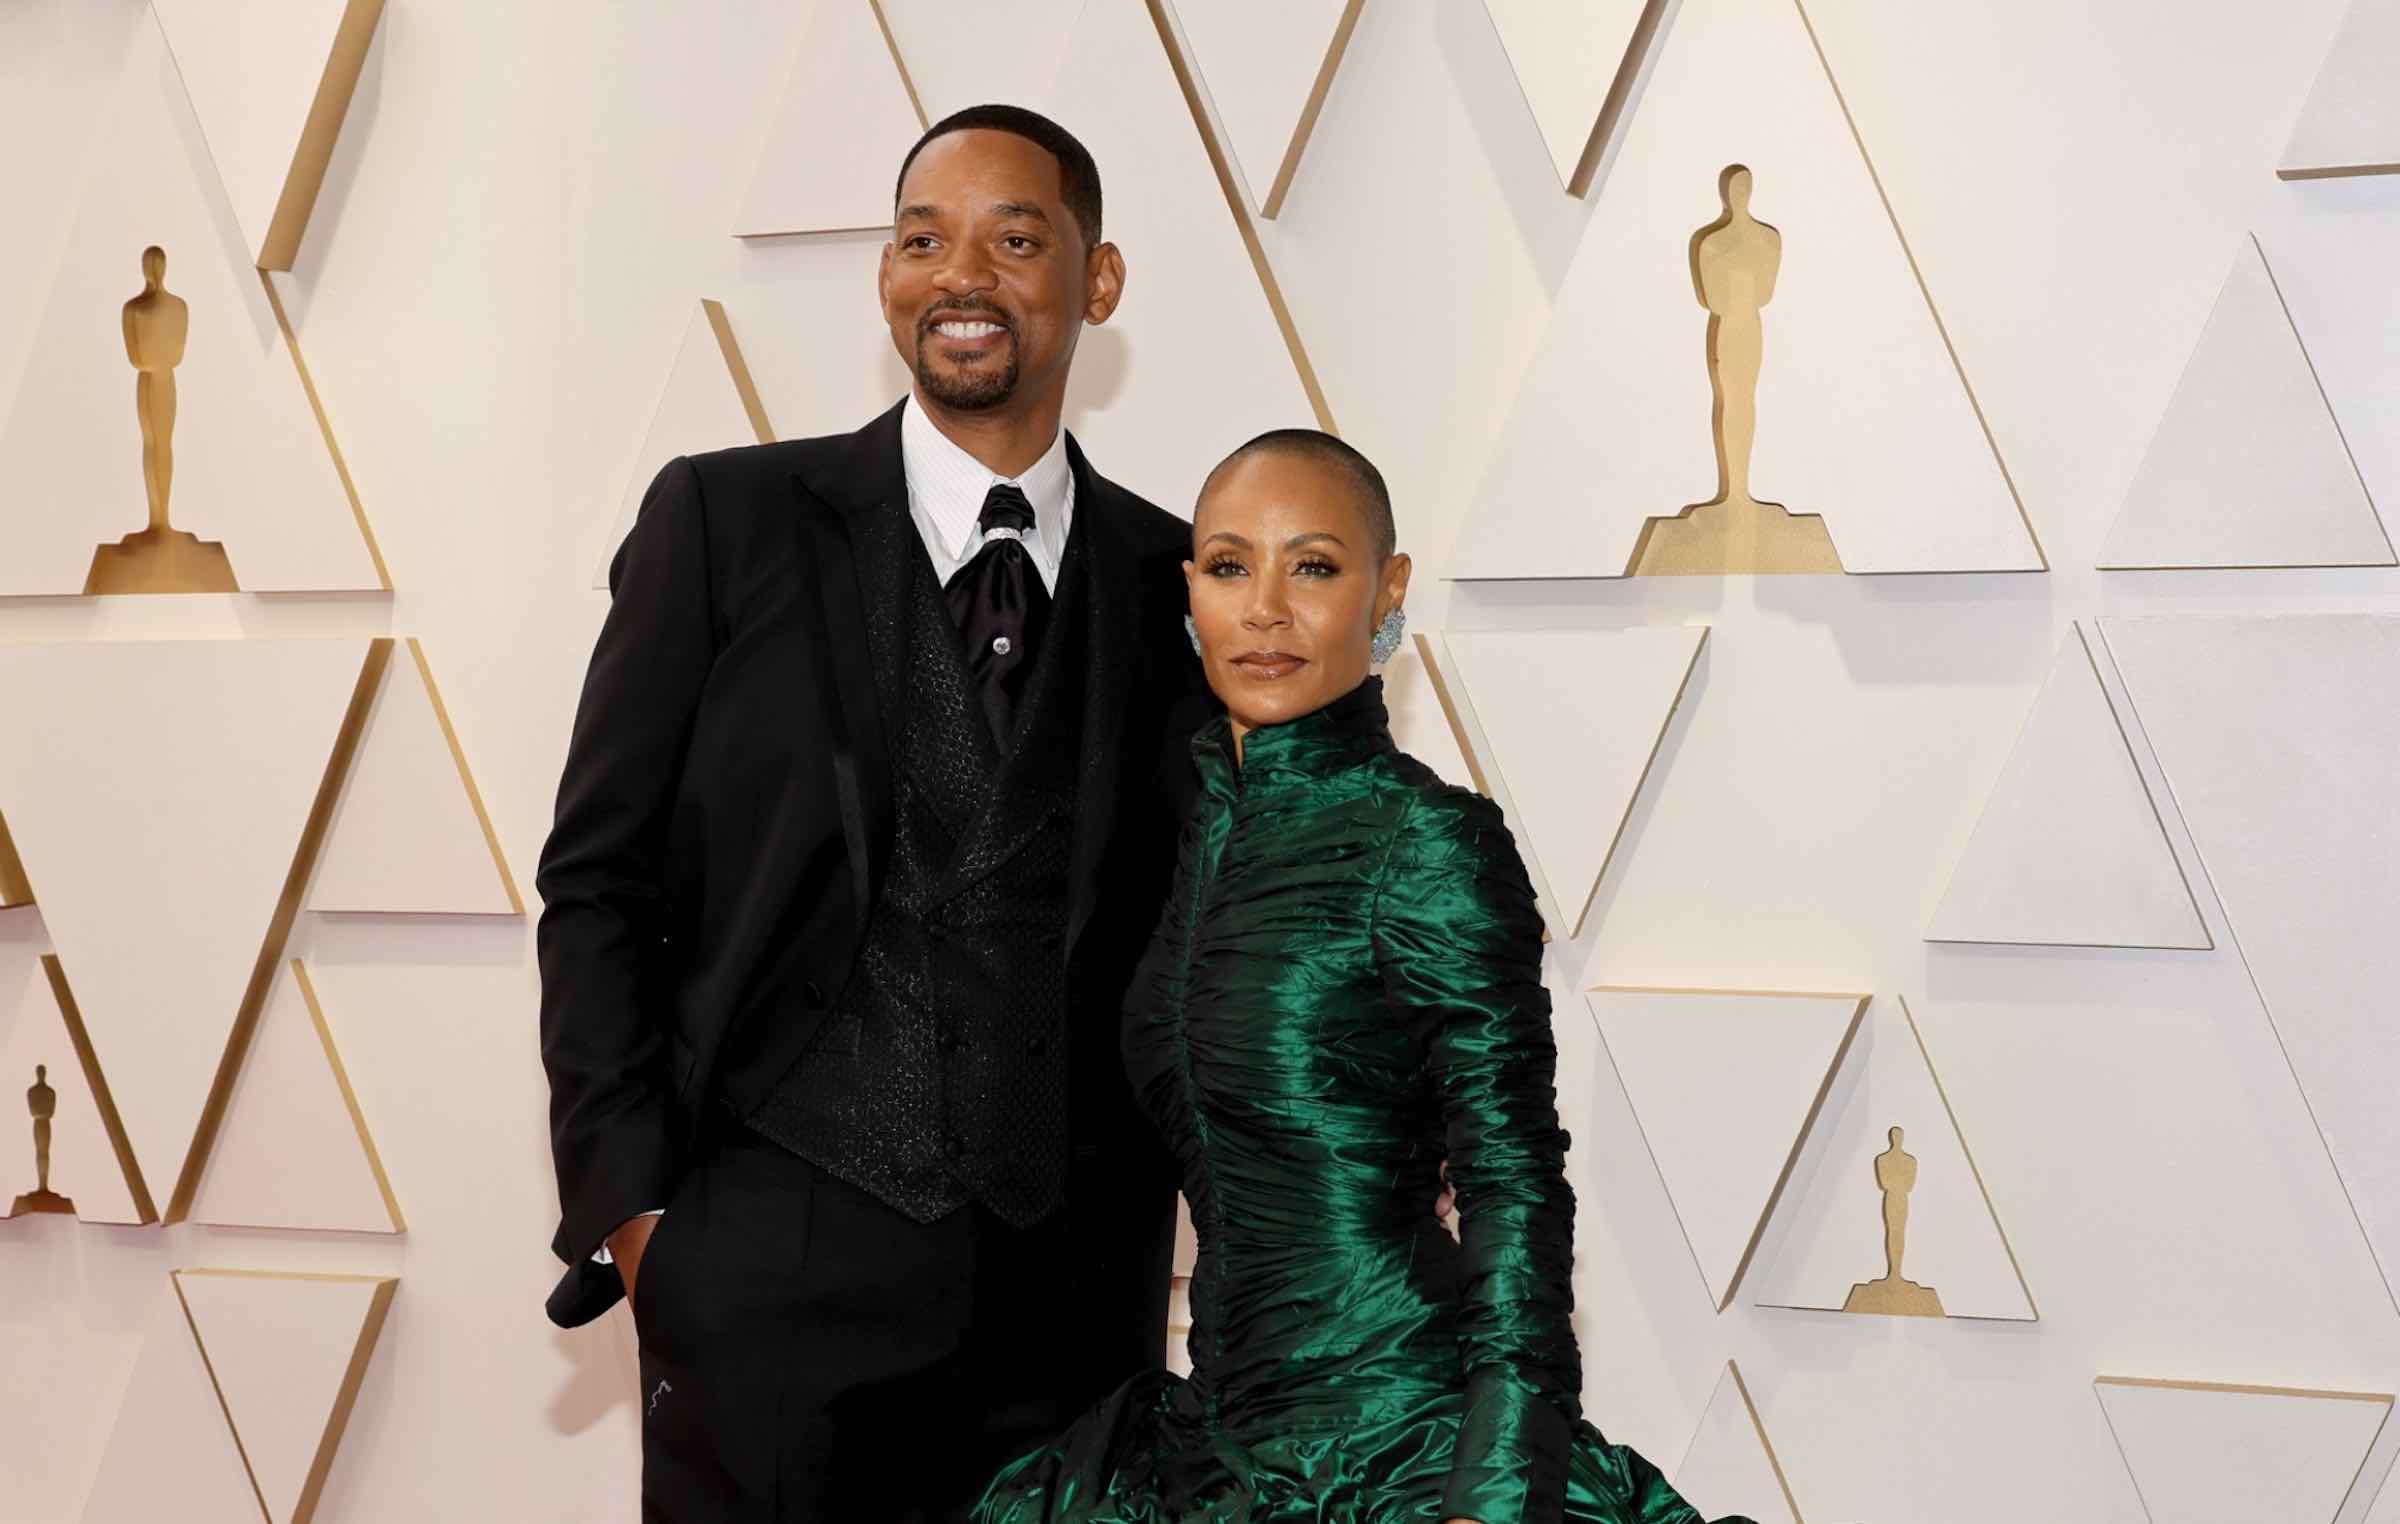 Will Smith is paying for the incident at the Oscars. Another video has fueled speculation about his marriage with Jada Pinkett. Here's all you need to know.